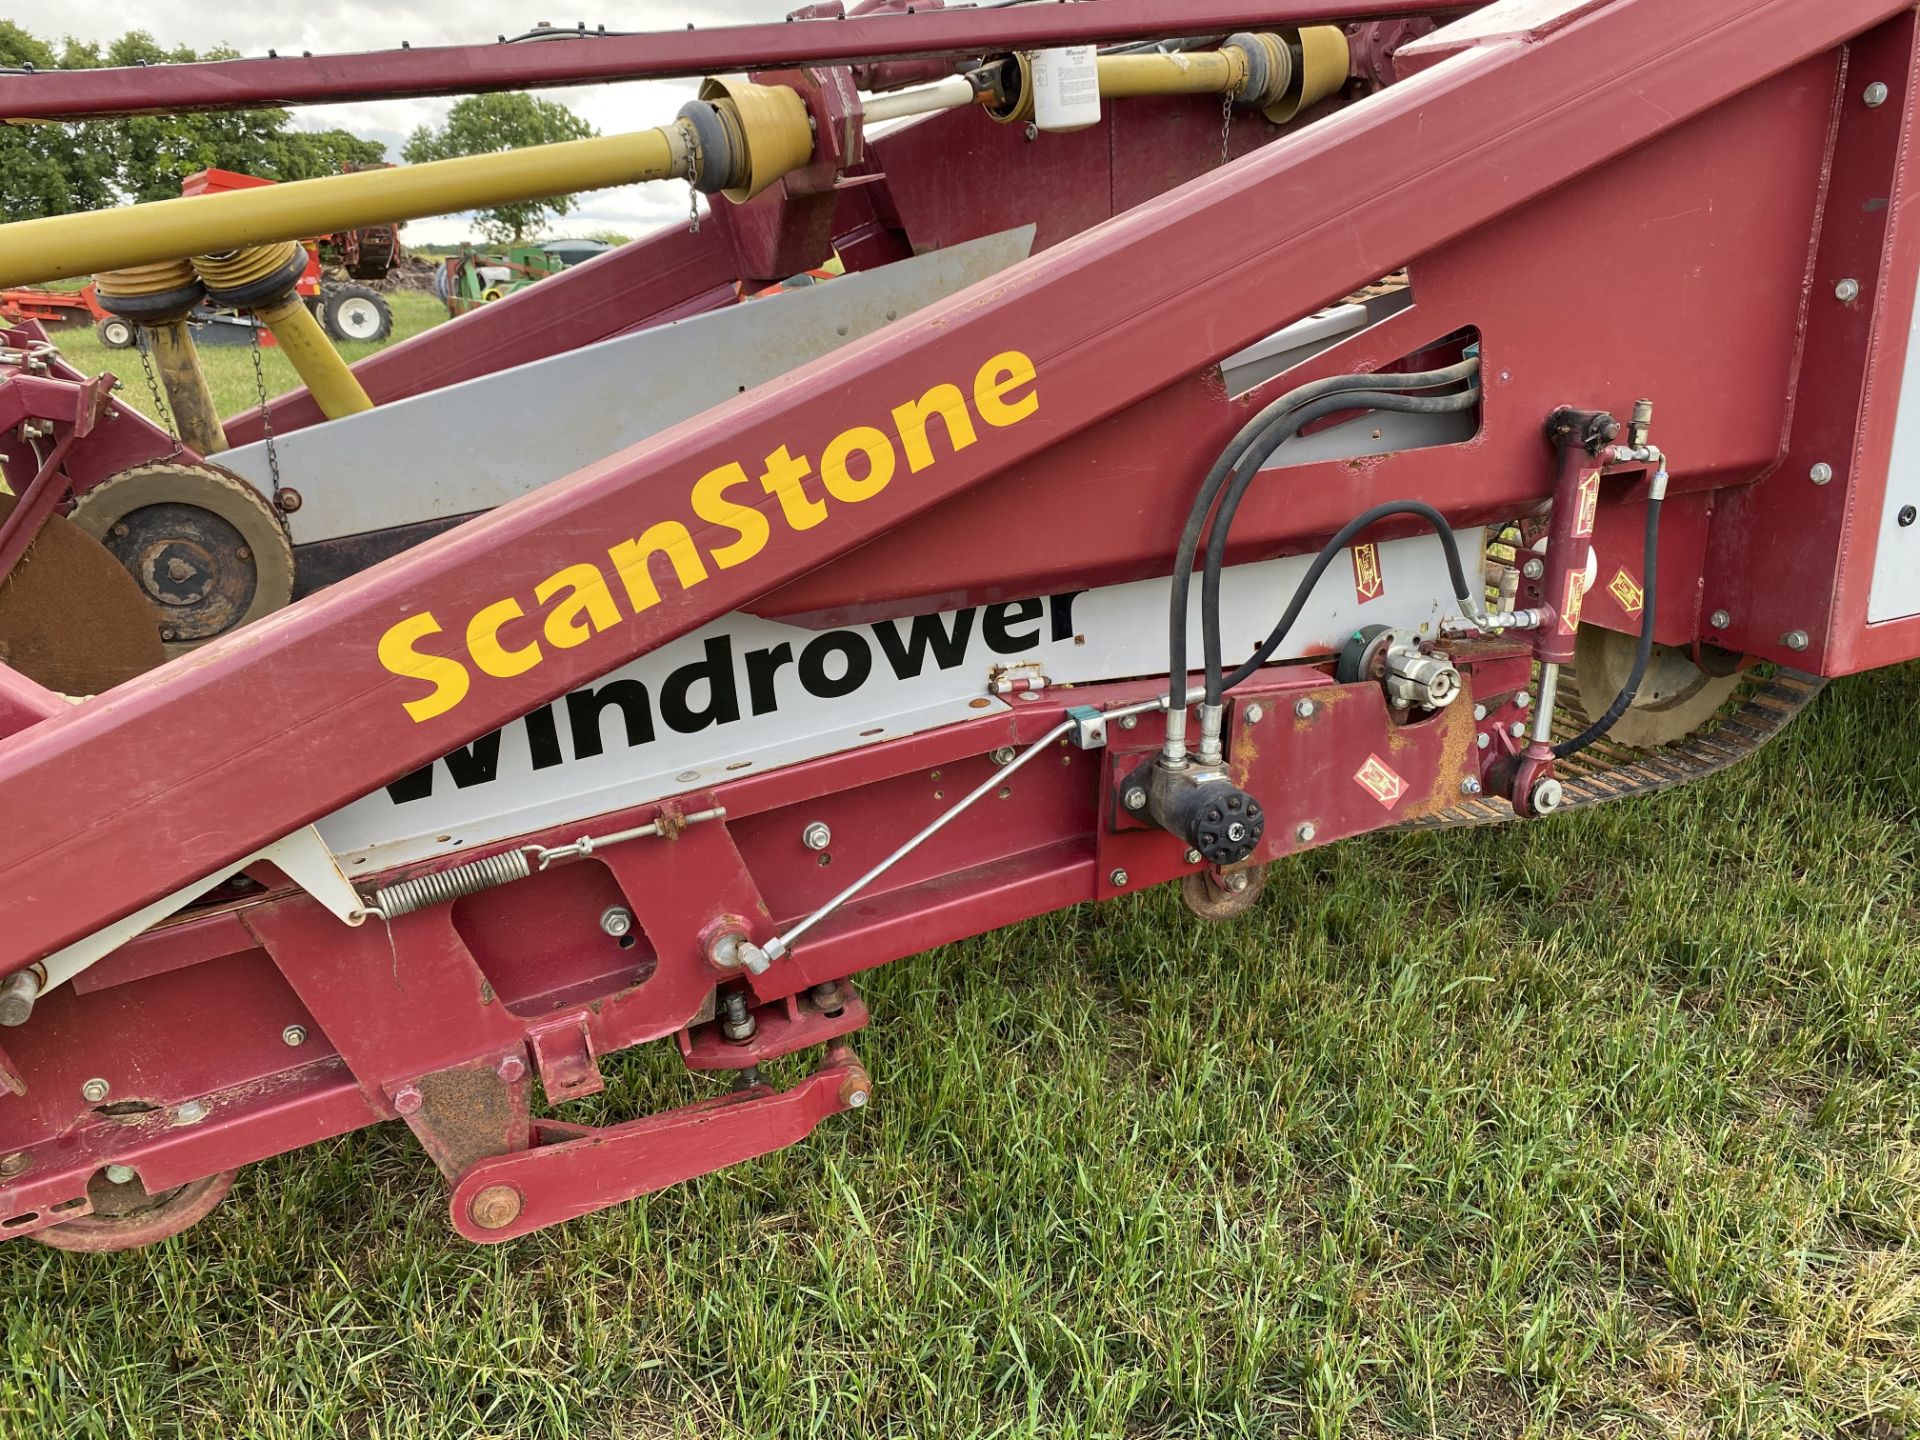 Scanstone trailed Windrower. Model WD17-2+5. 2014. Serial number 2030. Set for 72" beds. LM - Image 13 of 29